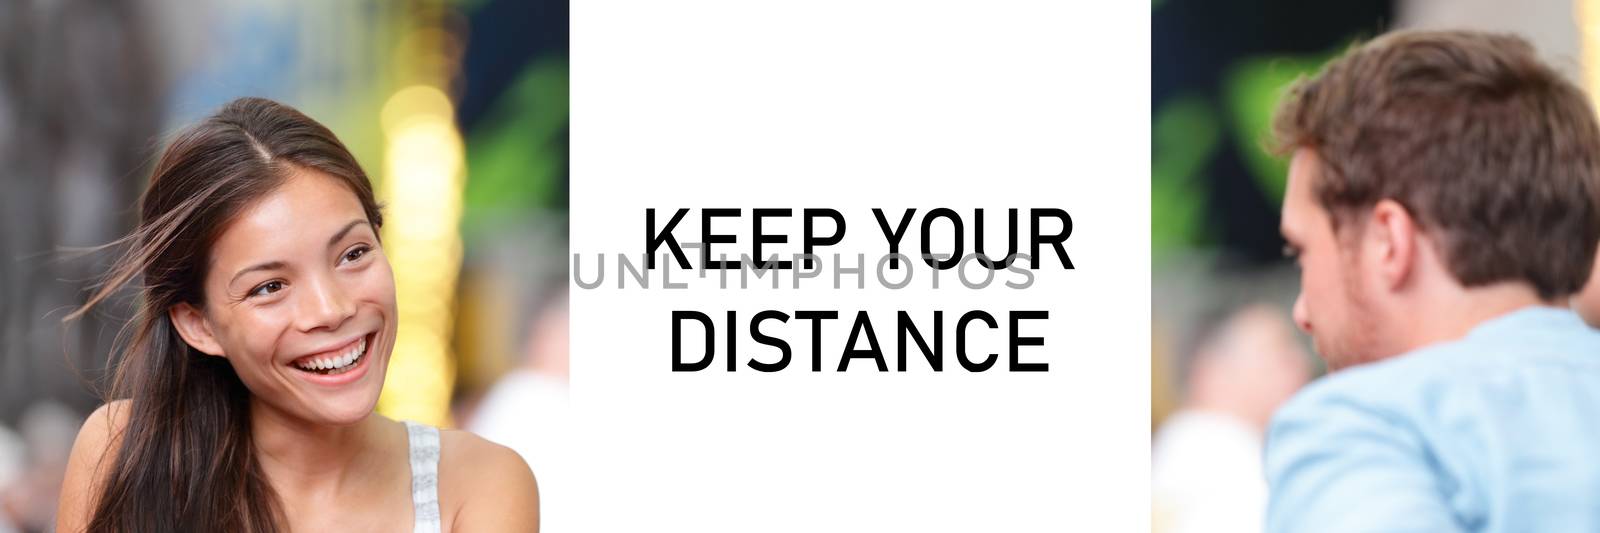 KEEP YOUR DISTANCE Covid-19 warning sign for people meeting talking together panoramic banner. Asian woman speaking to man.